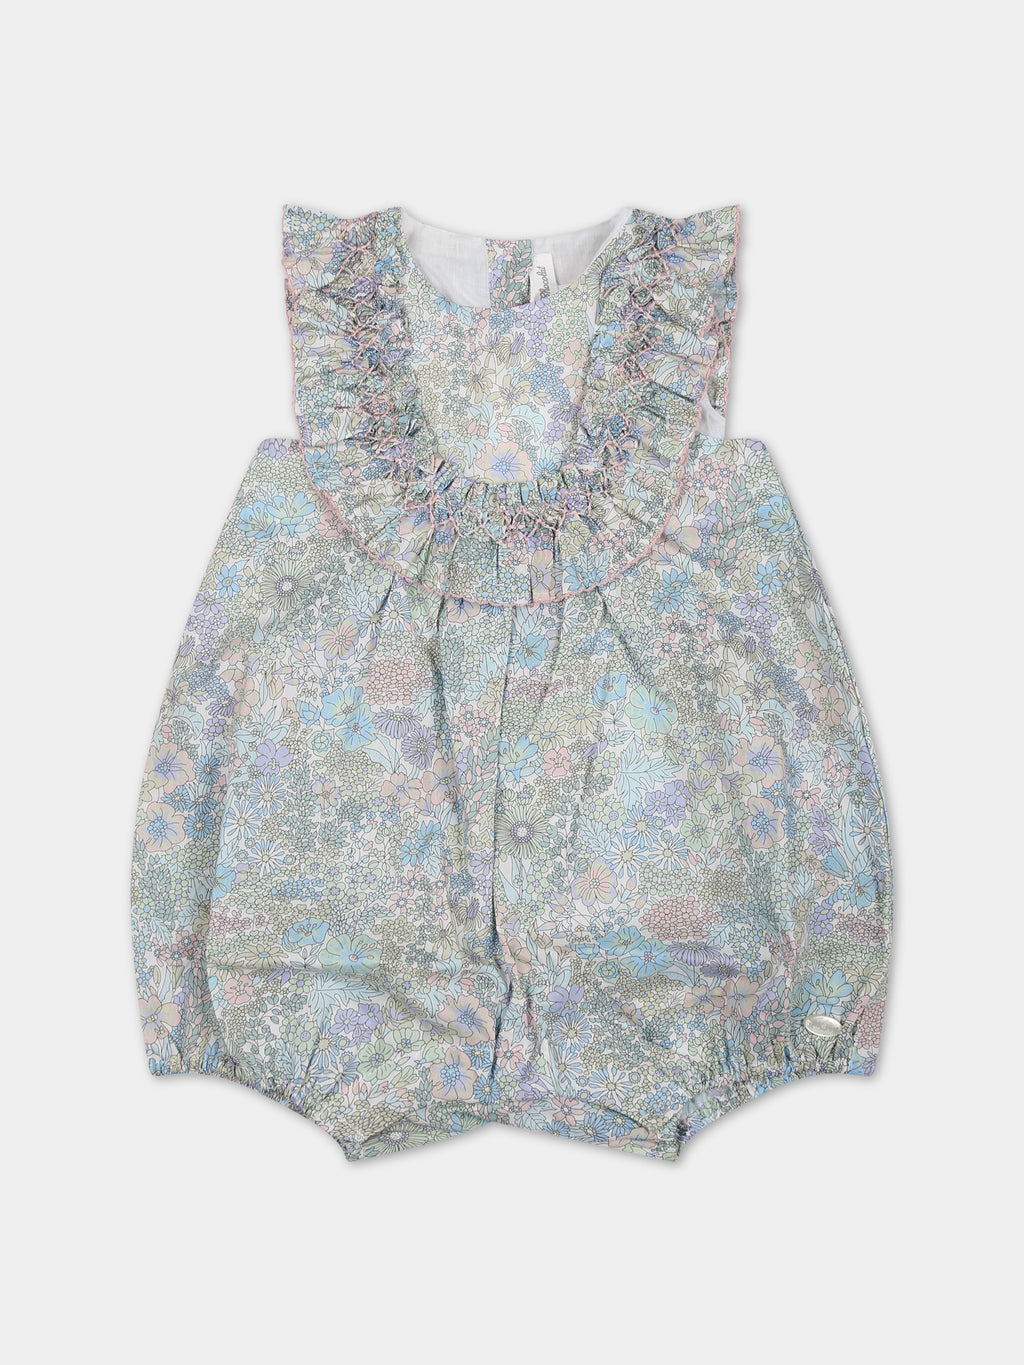 Light blue romper for baby girl with floral print